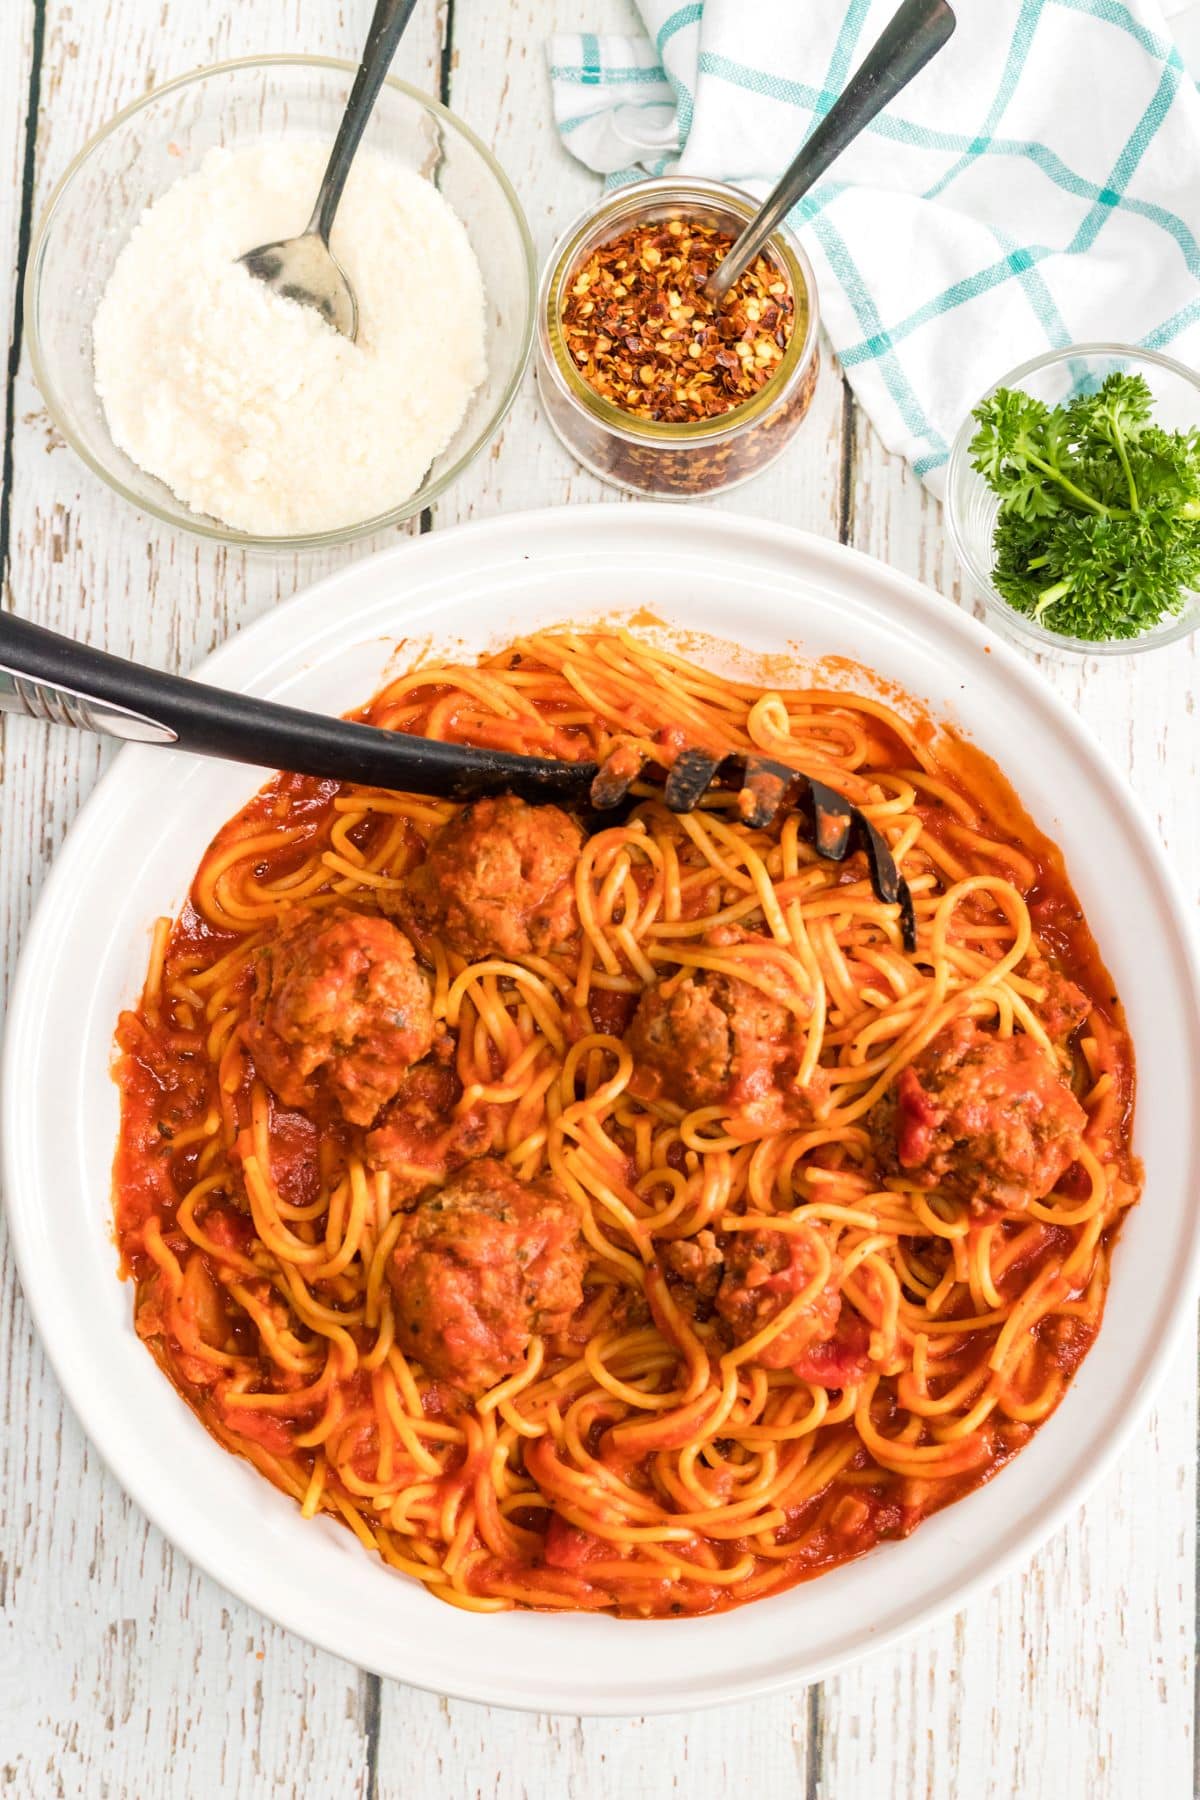 Homemade Spaghetti and Meatballs Recipe in a serving bowl with a spoon.